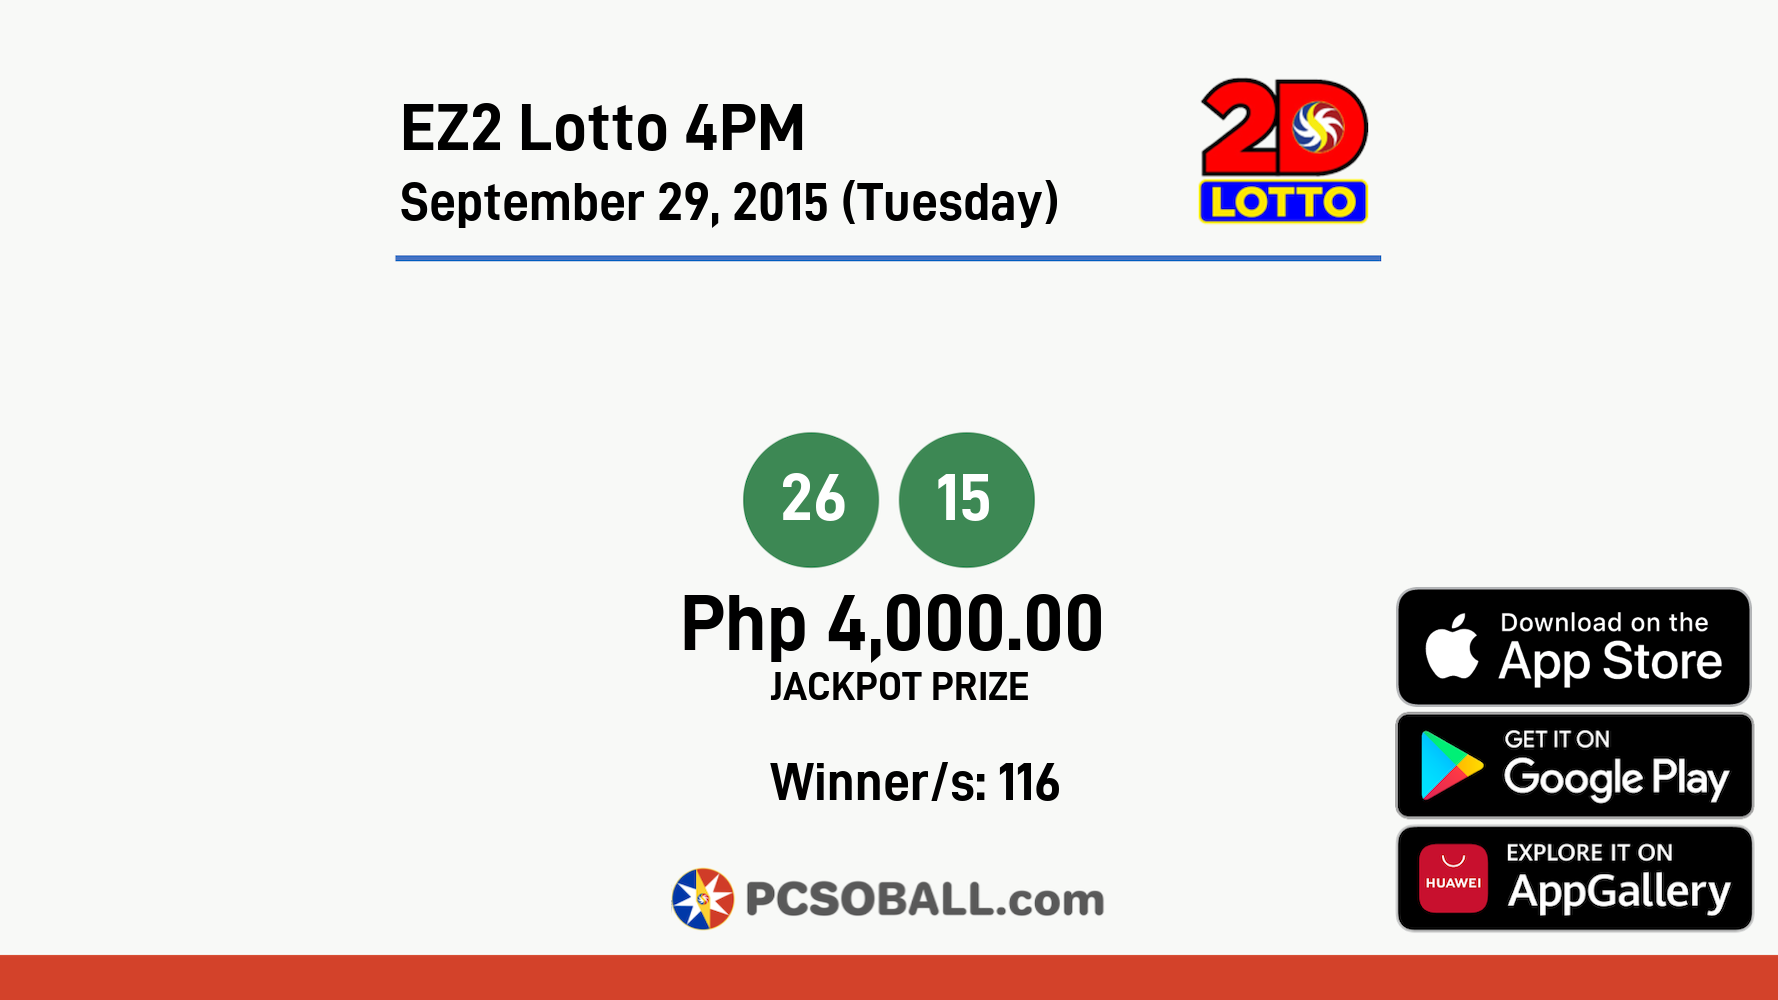 EZ2 Lotto 4PM September 29, 2015 (Tuesday) Result